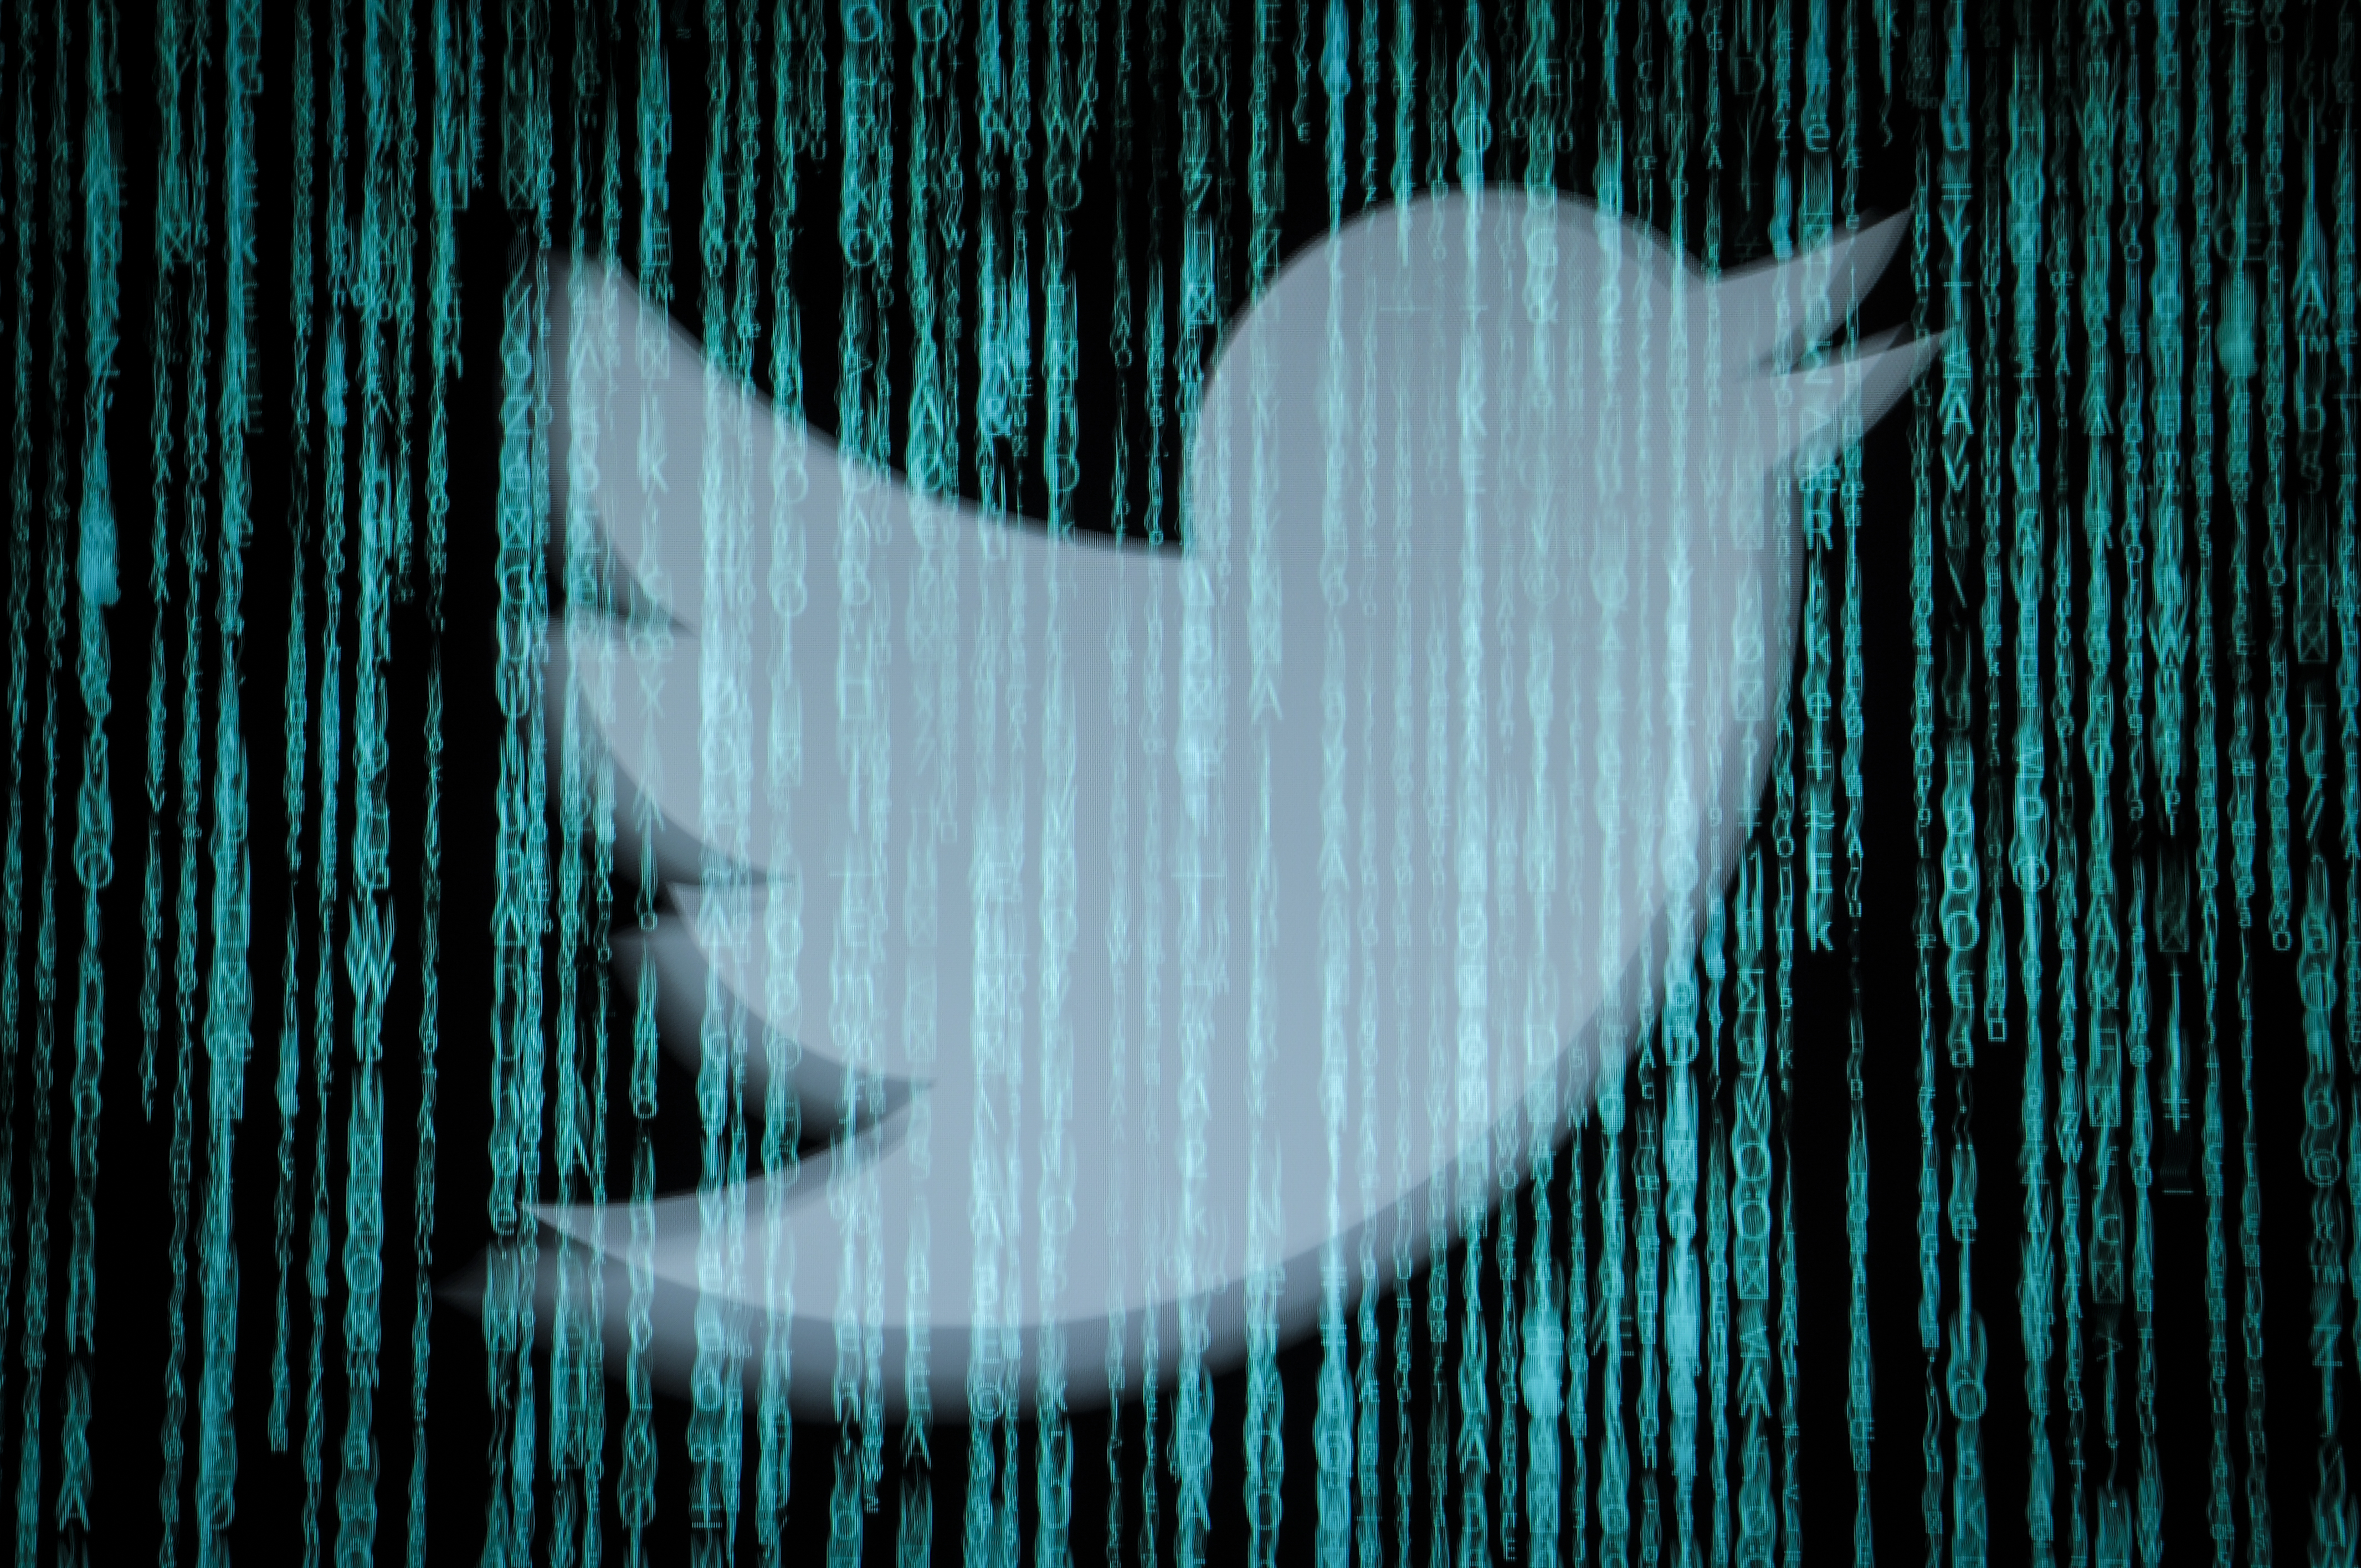 A popular WordPress plugin leaked access tokens capable of hijacking  Twitter accounts